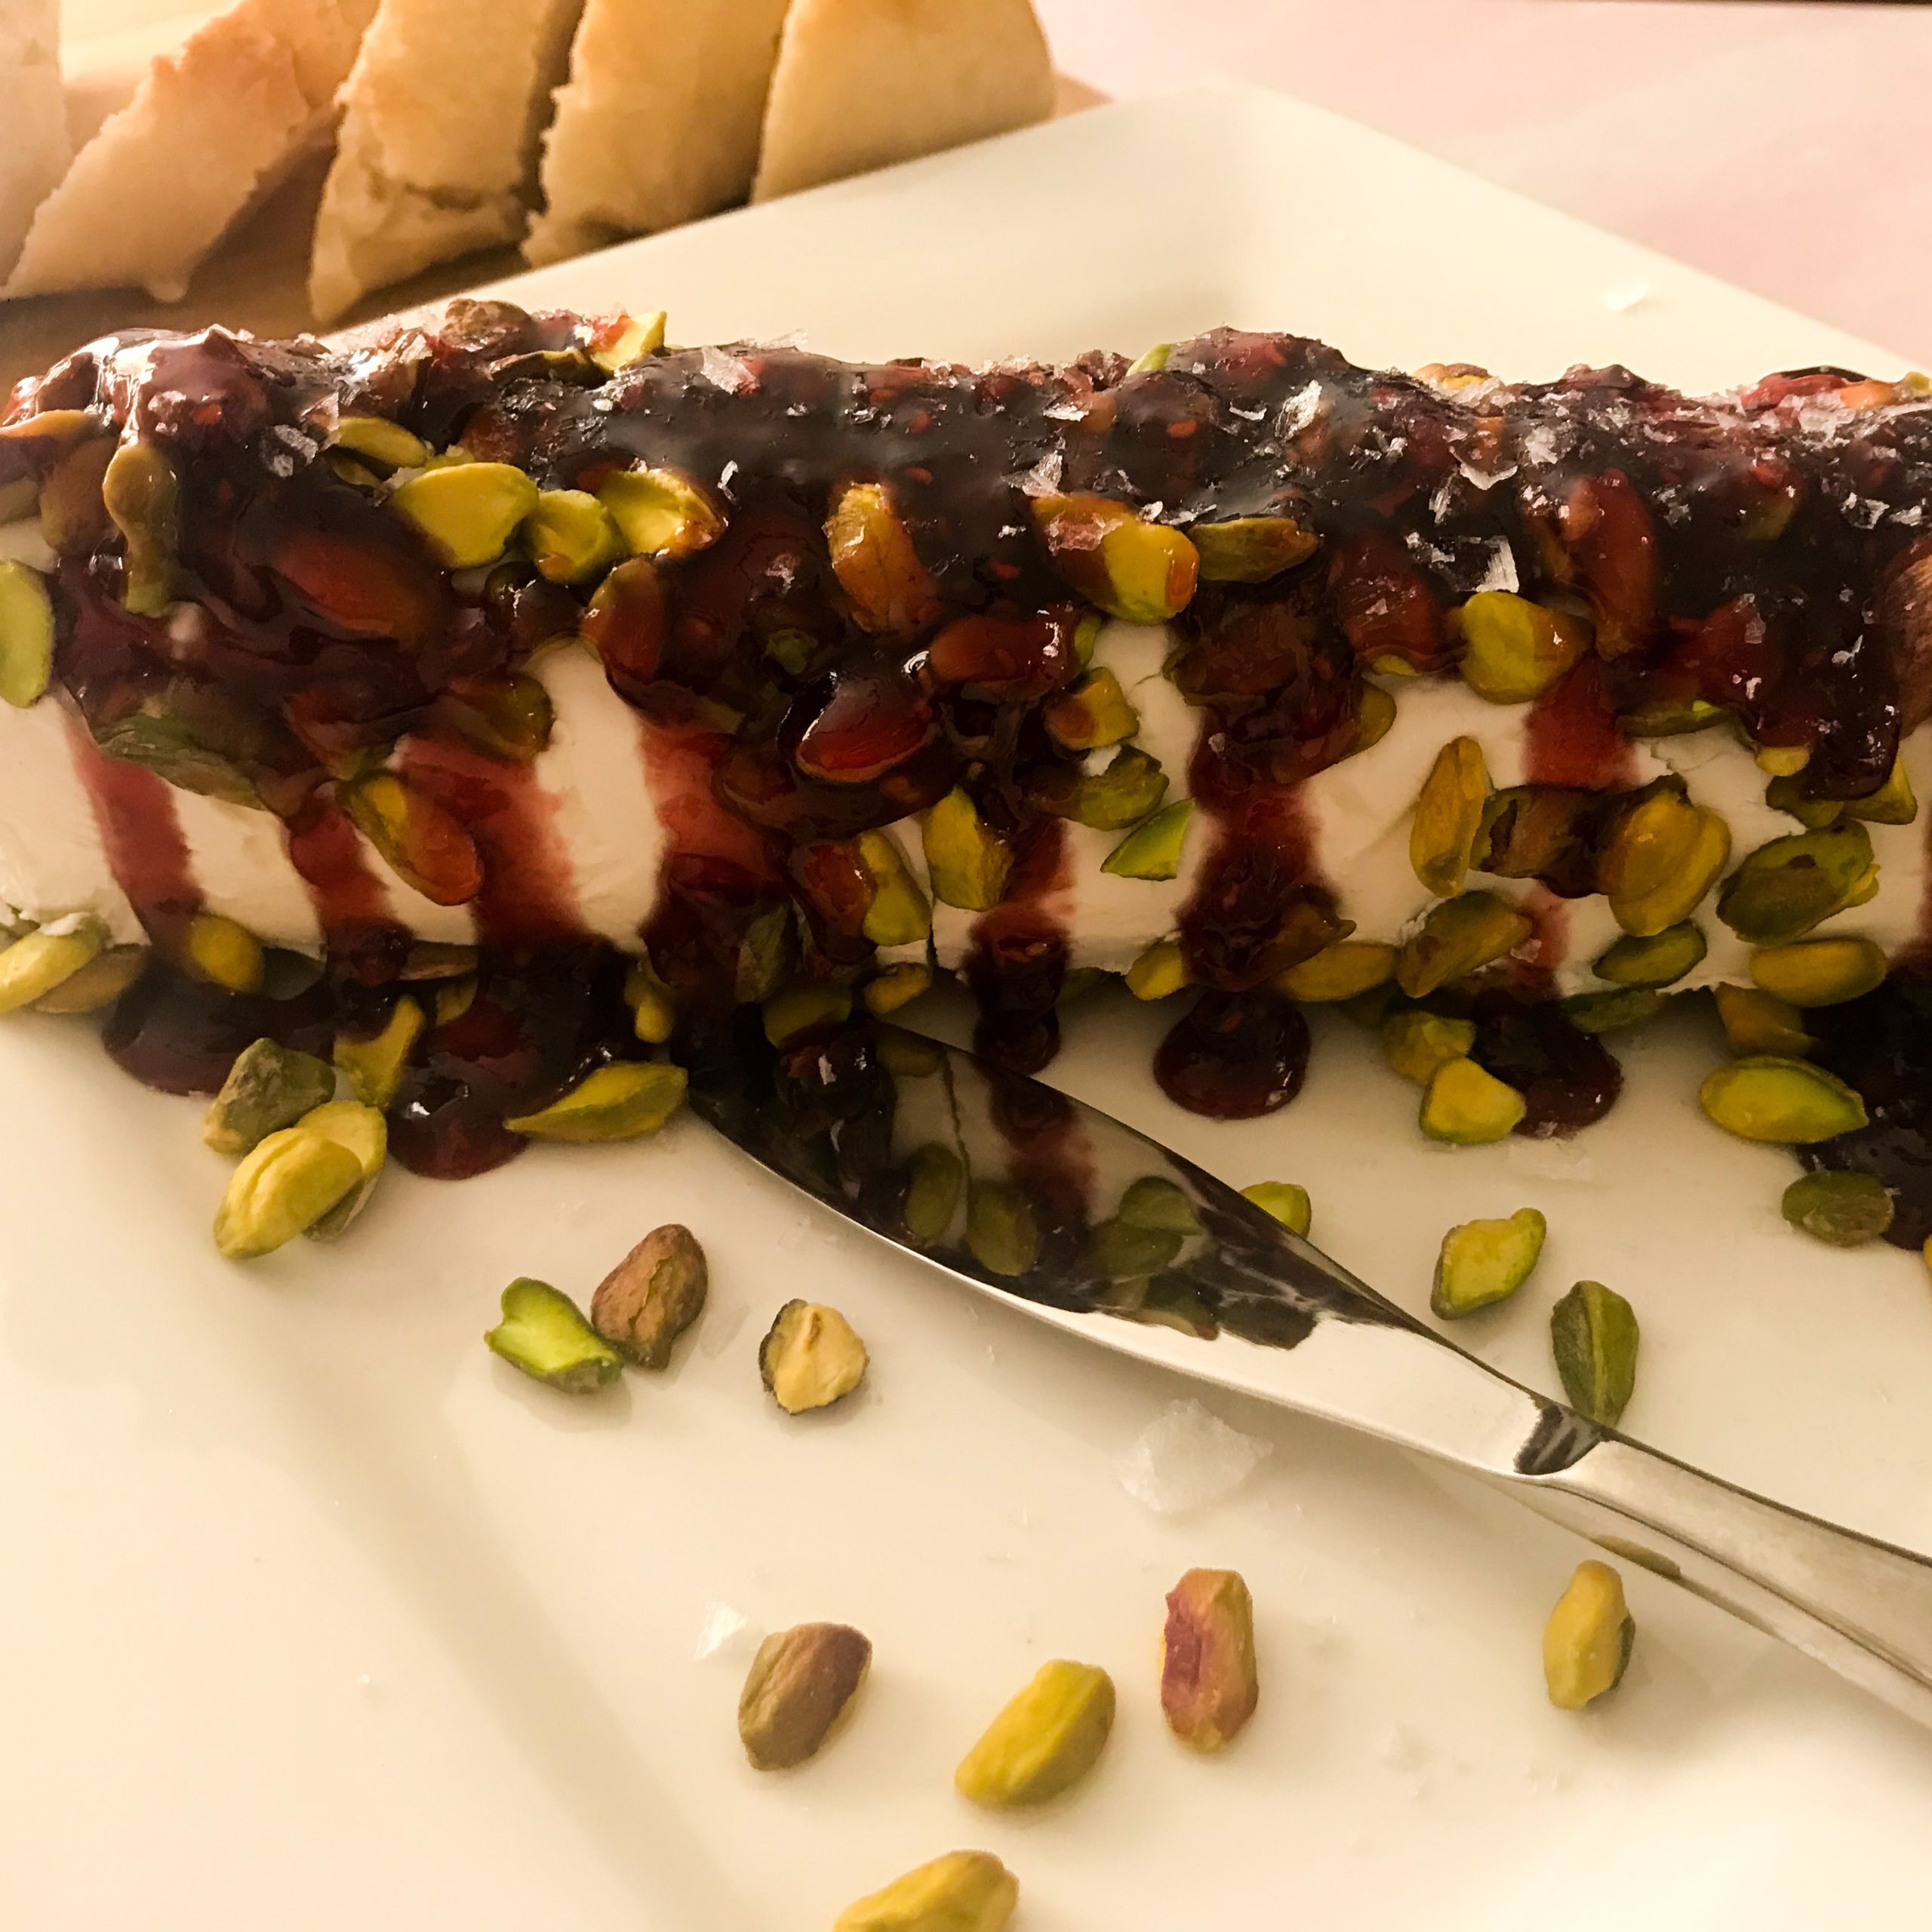 log of goat cheese covered in pistachios and raspberry preserves on a plate